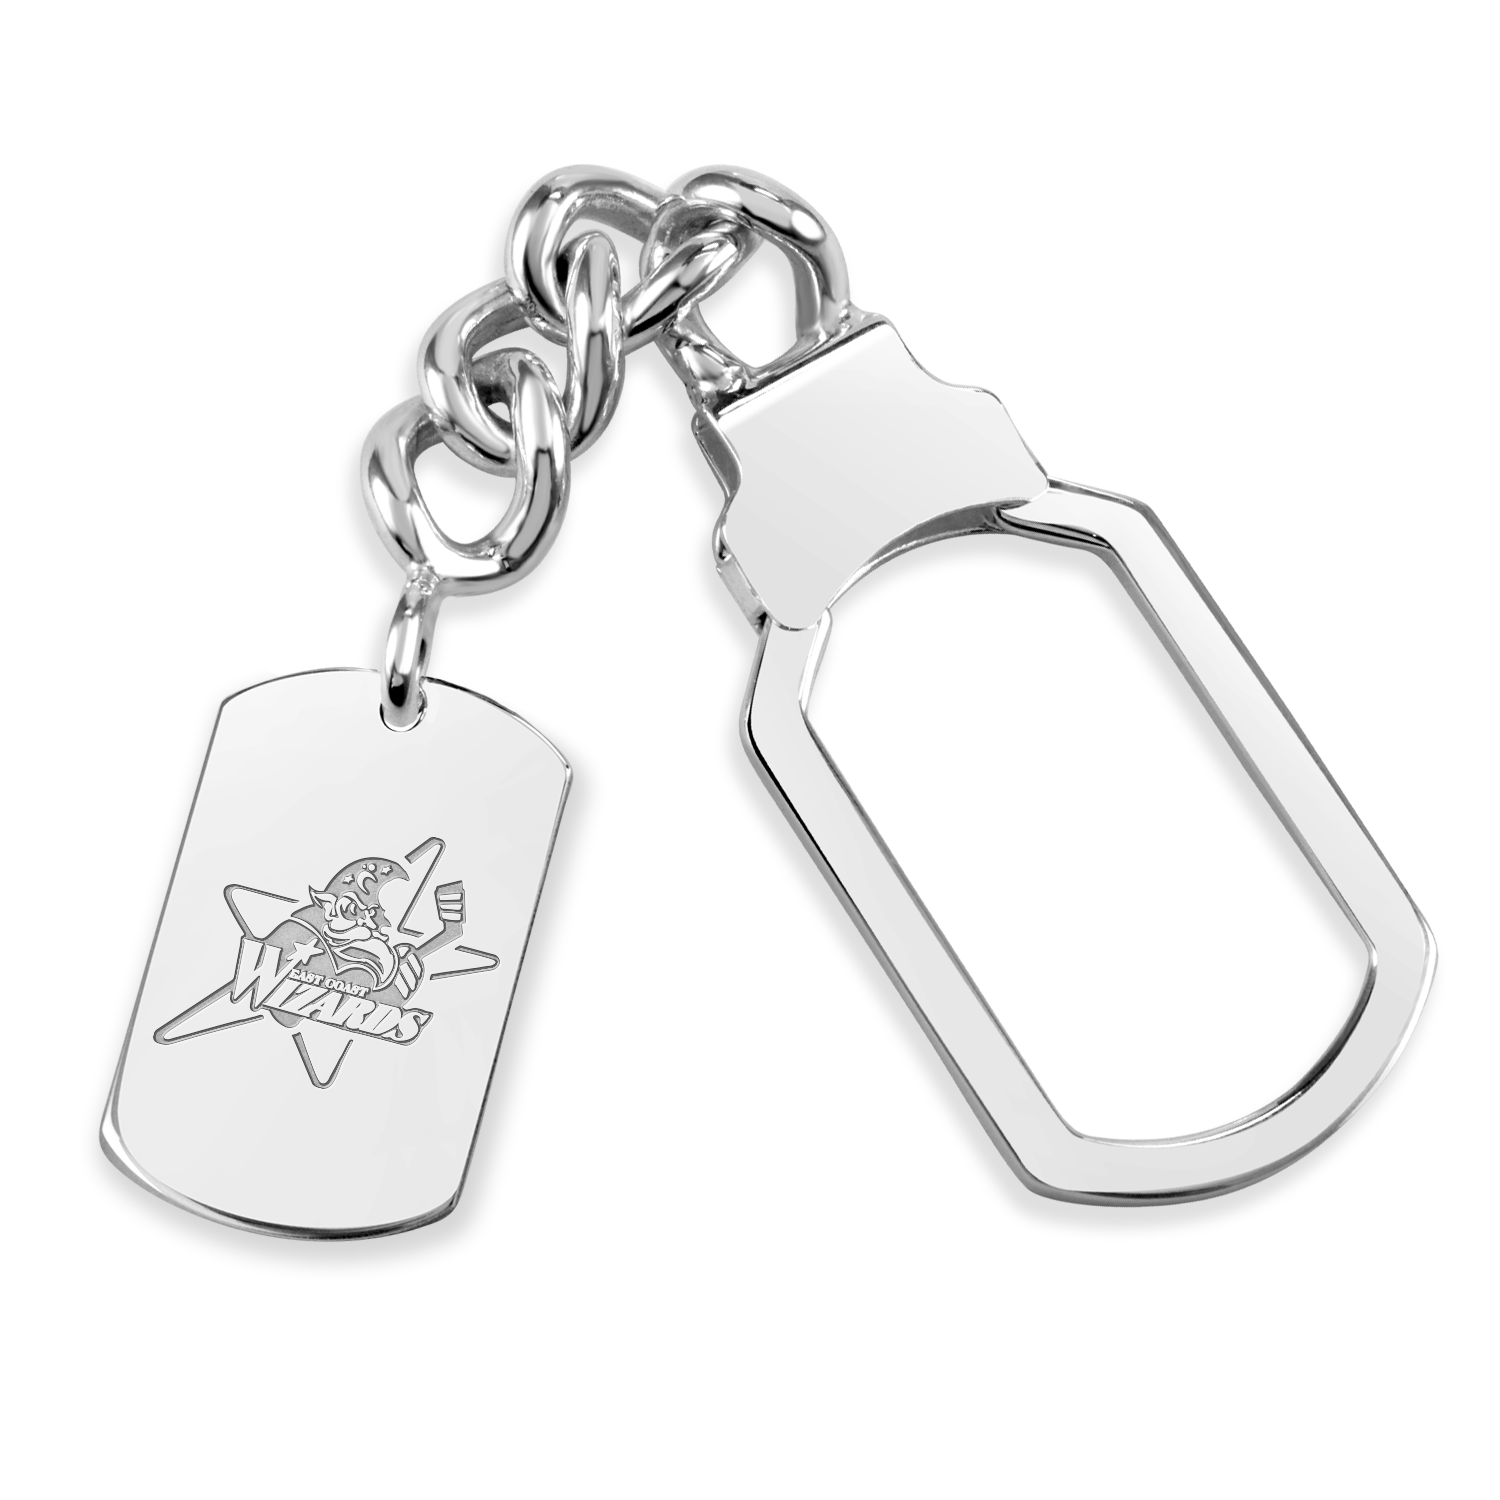 East Coast Wizards Tag Tension Key Chain